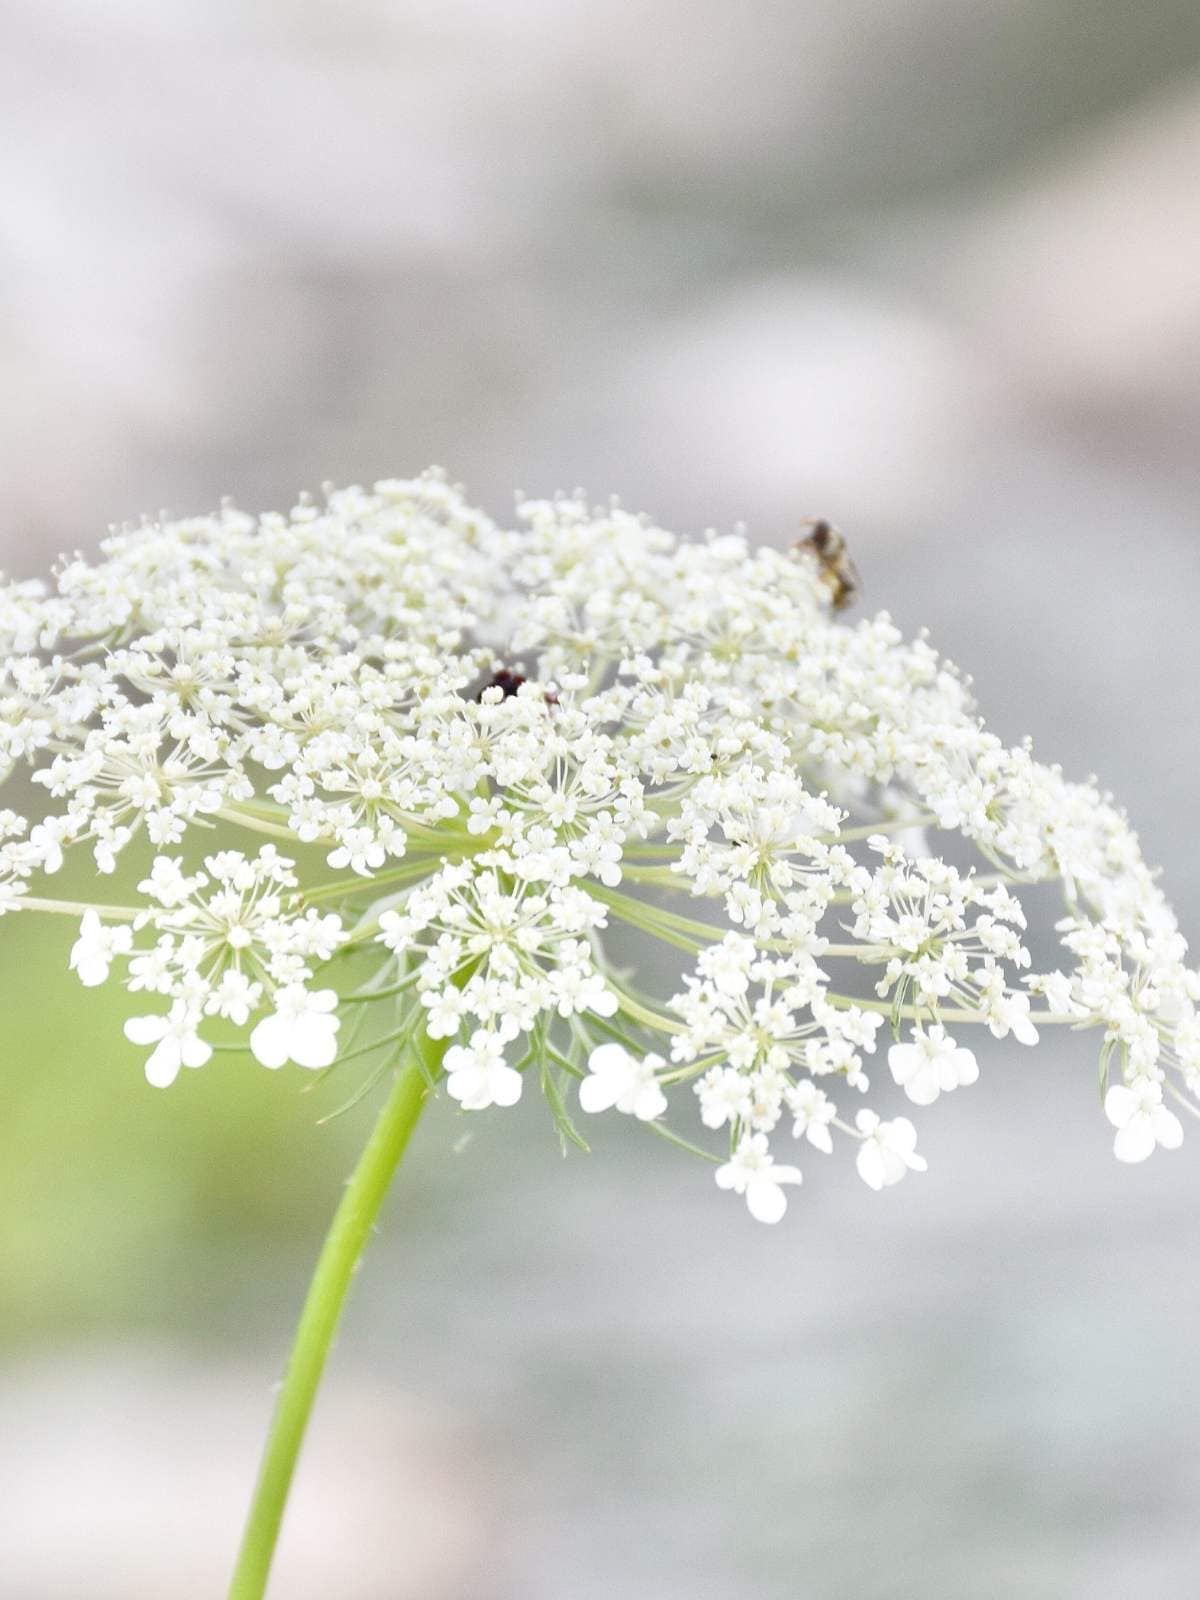 How to Grow and Care for Queen Anne's Lace